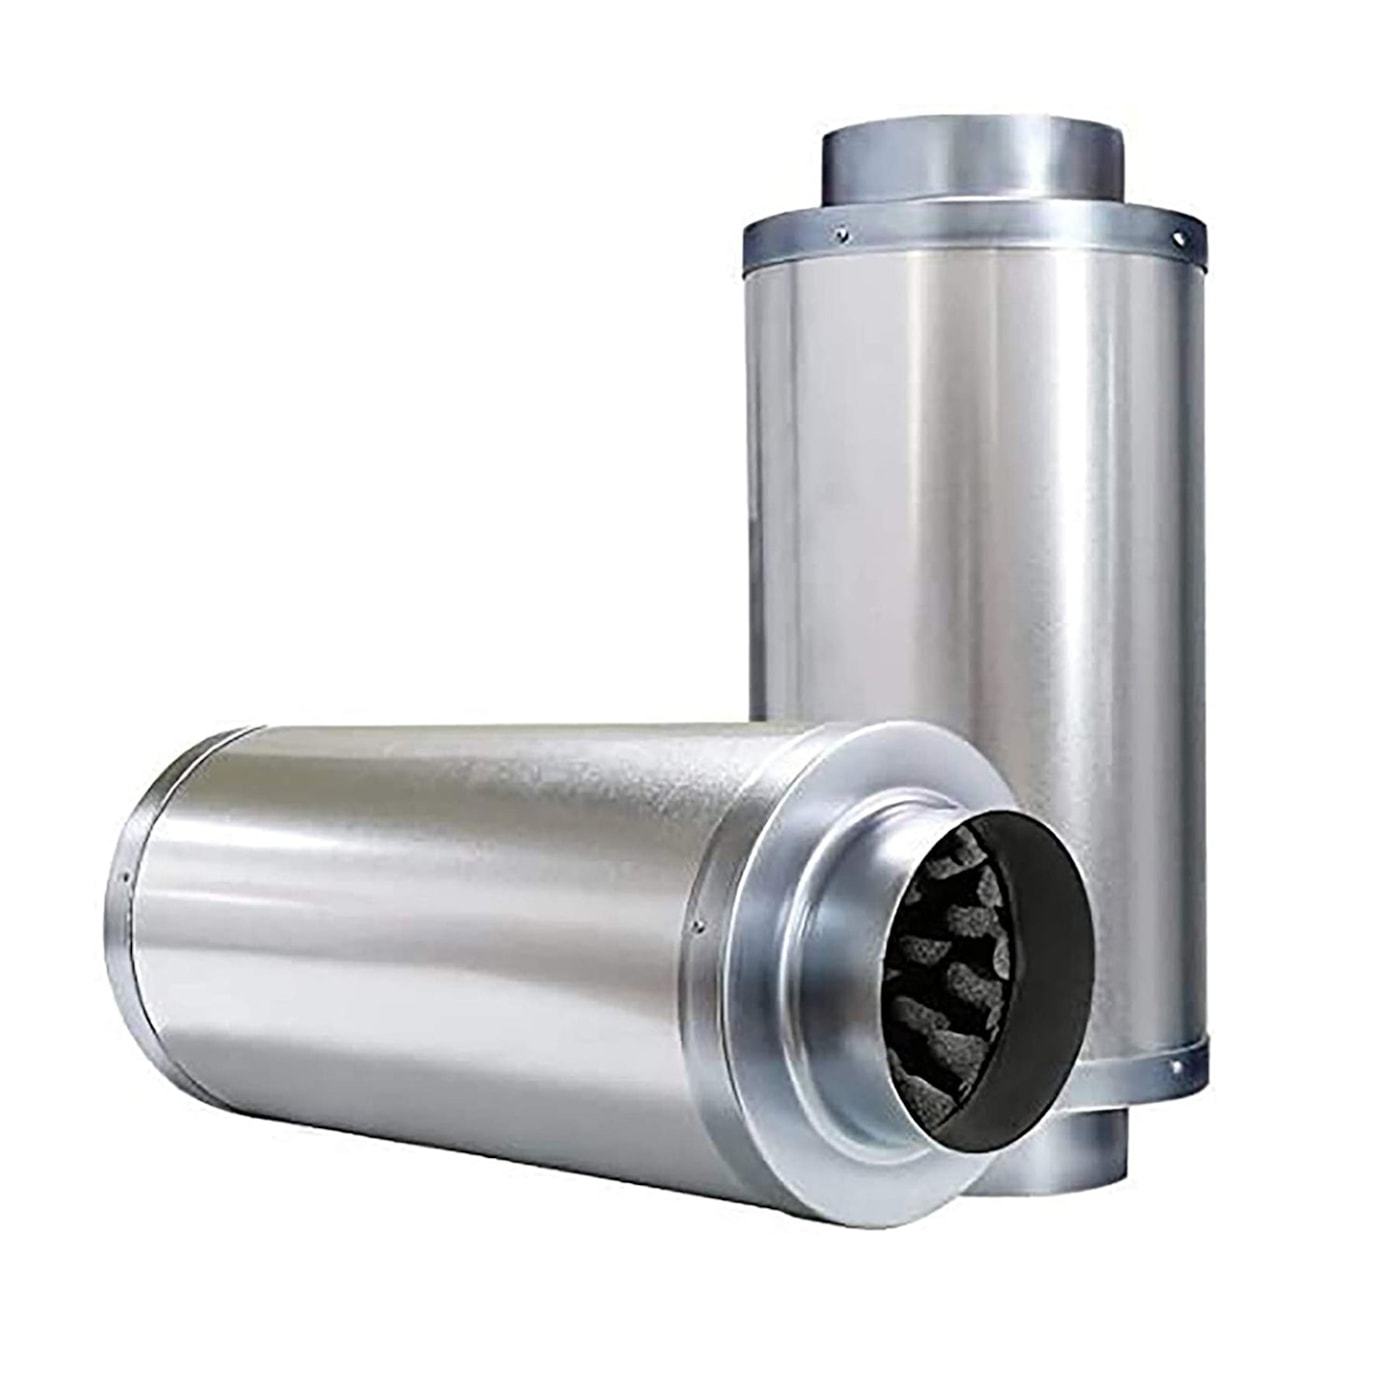 VIVOSUN 6 Inch Noise Reducer Silencer for Inline Duct Fan